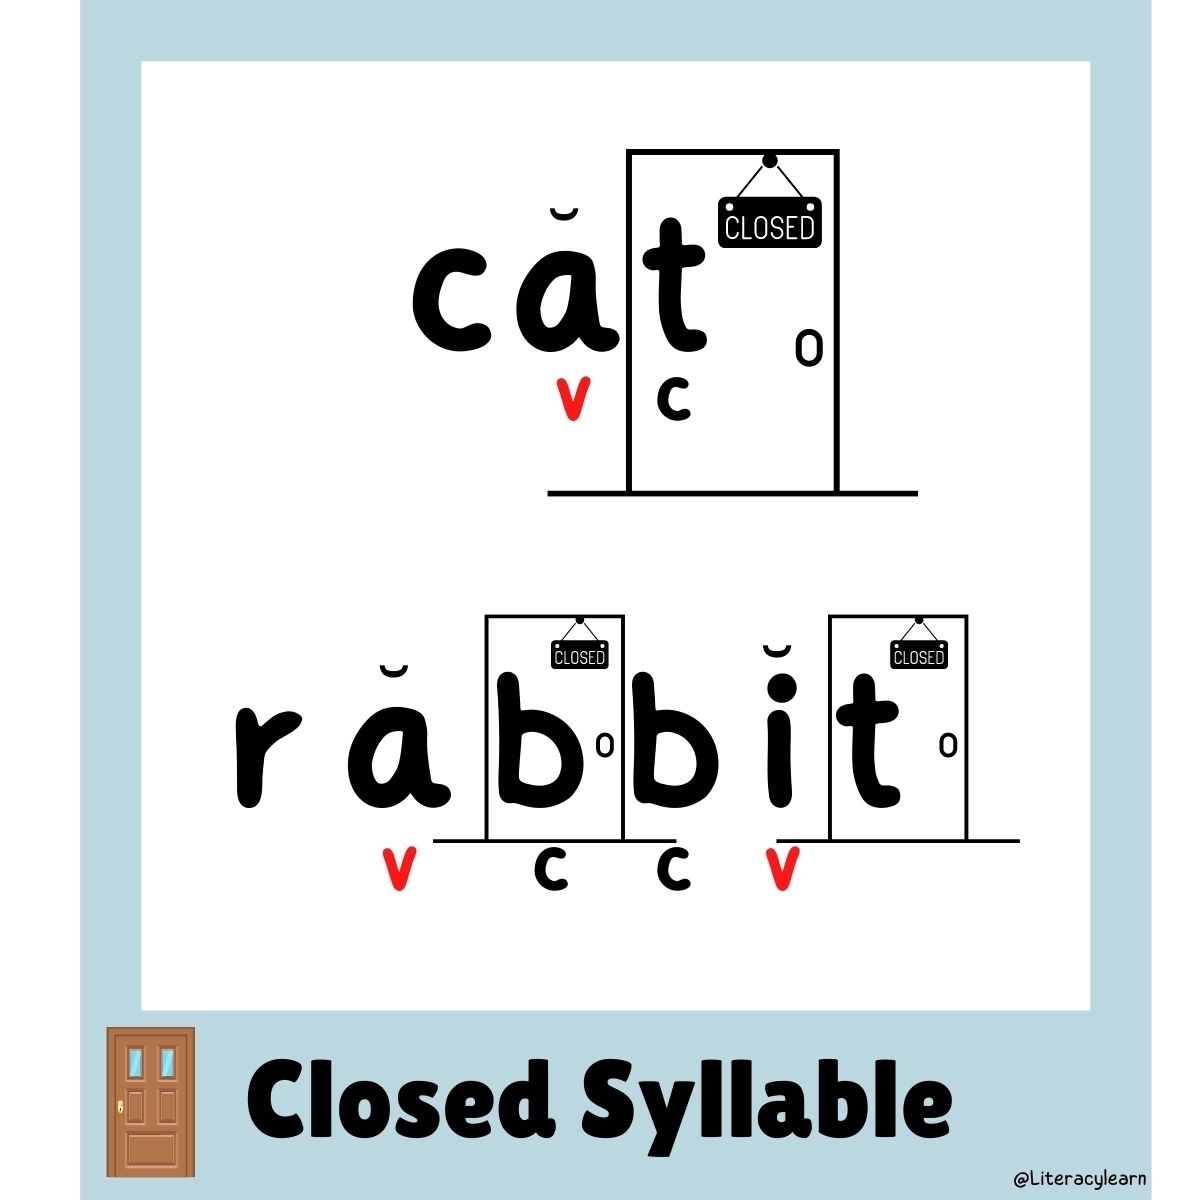 A blue graphic with words "cat, rabbit" showing closed syllable words.